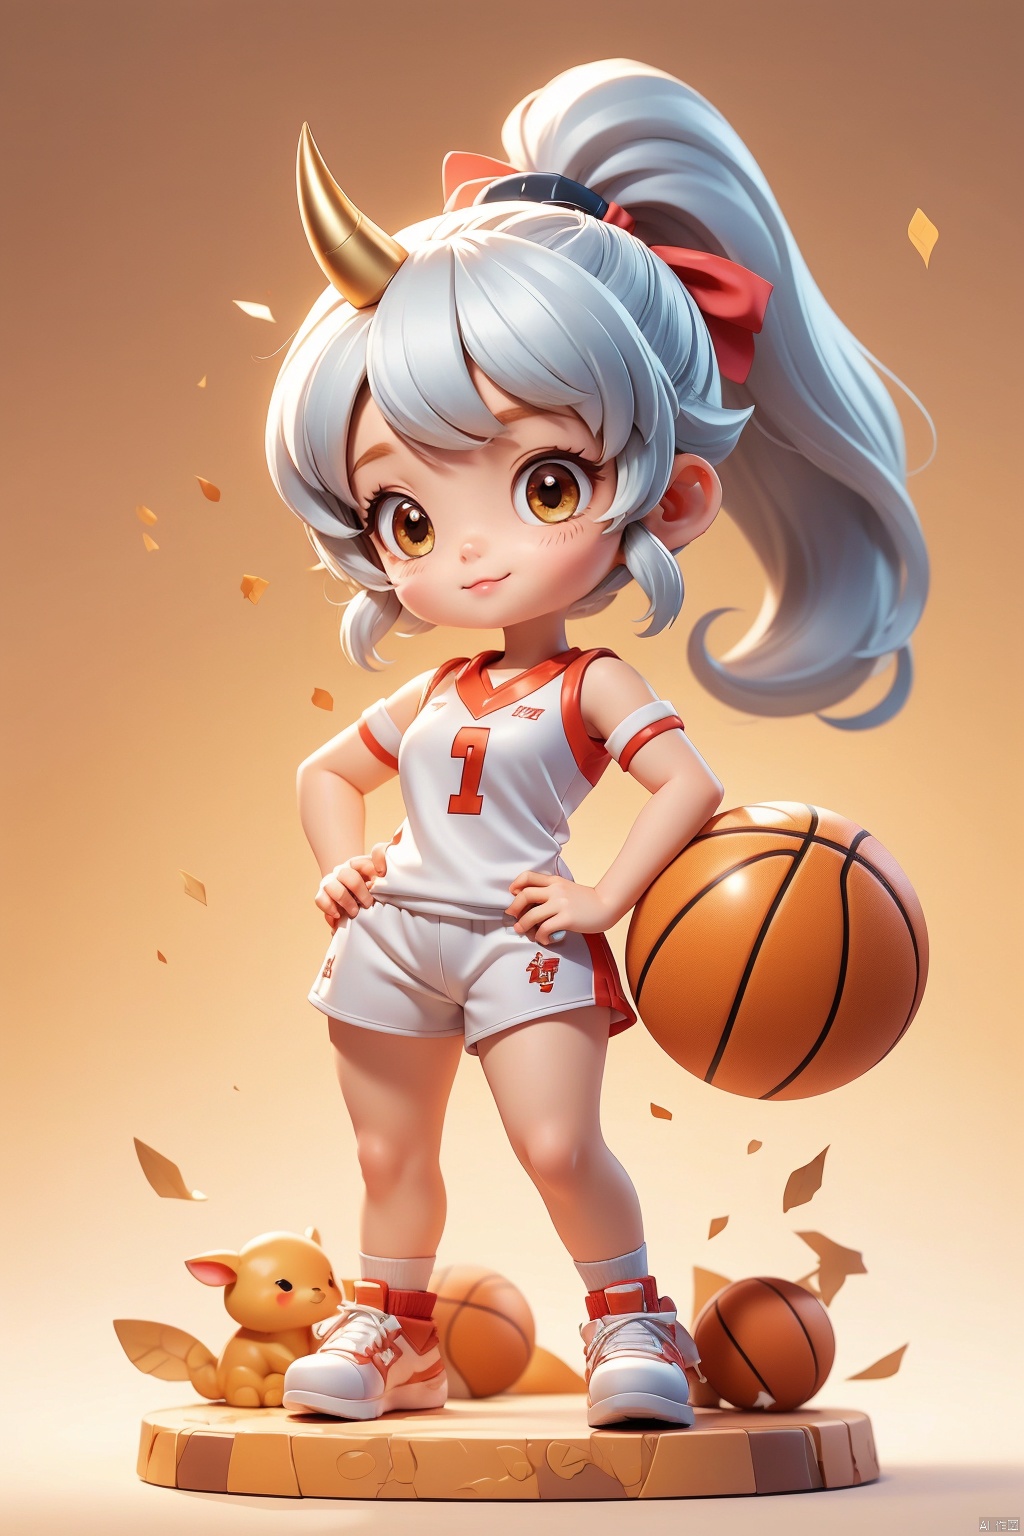 1 girl, 3 years old, solo, (Q version :1.6), IP, determined expression, horns, animal features, blush, basketball uniform, athletic figure, simple white background, silver hair, side ponytail, hands on hips